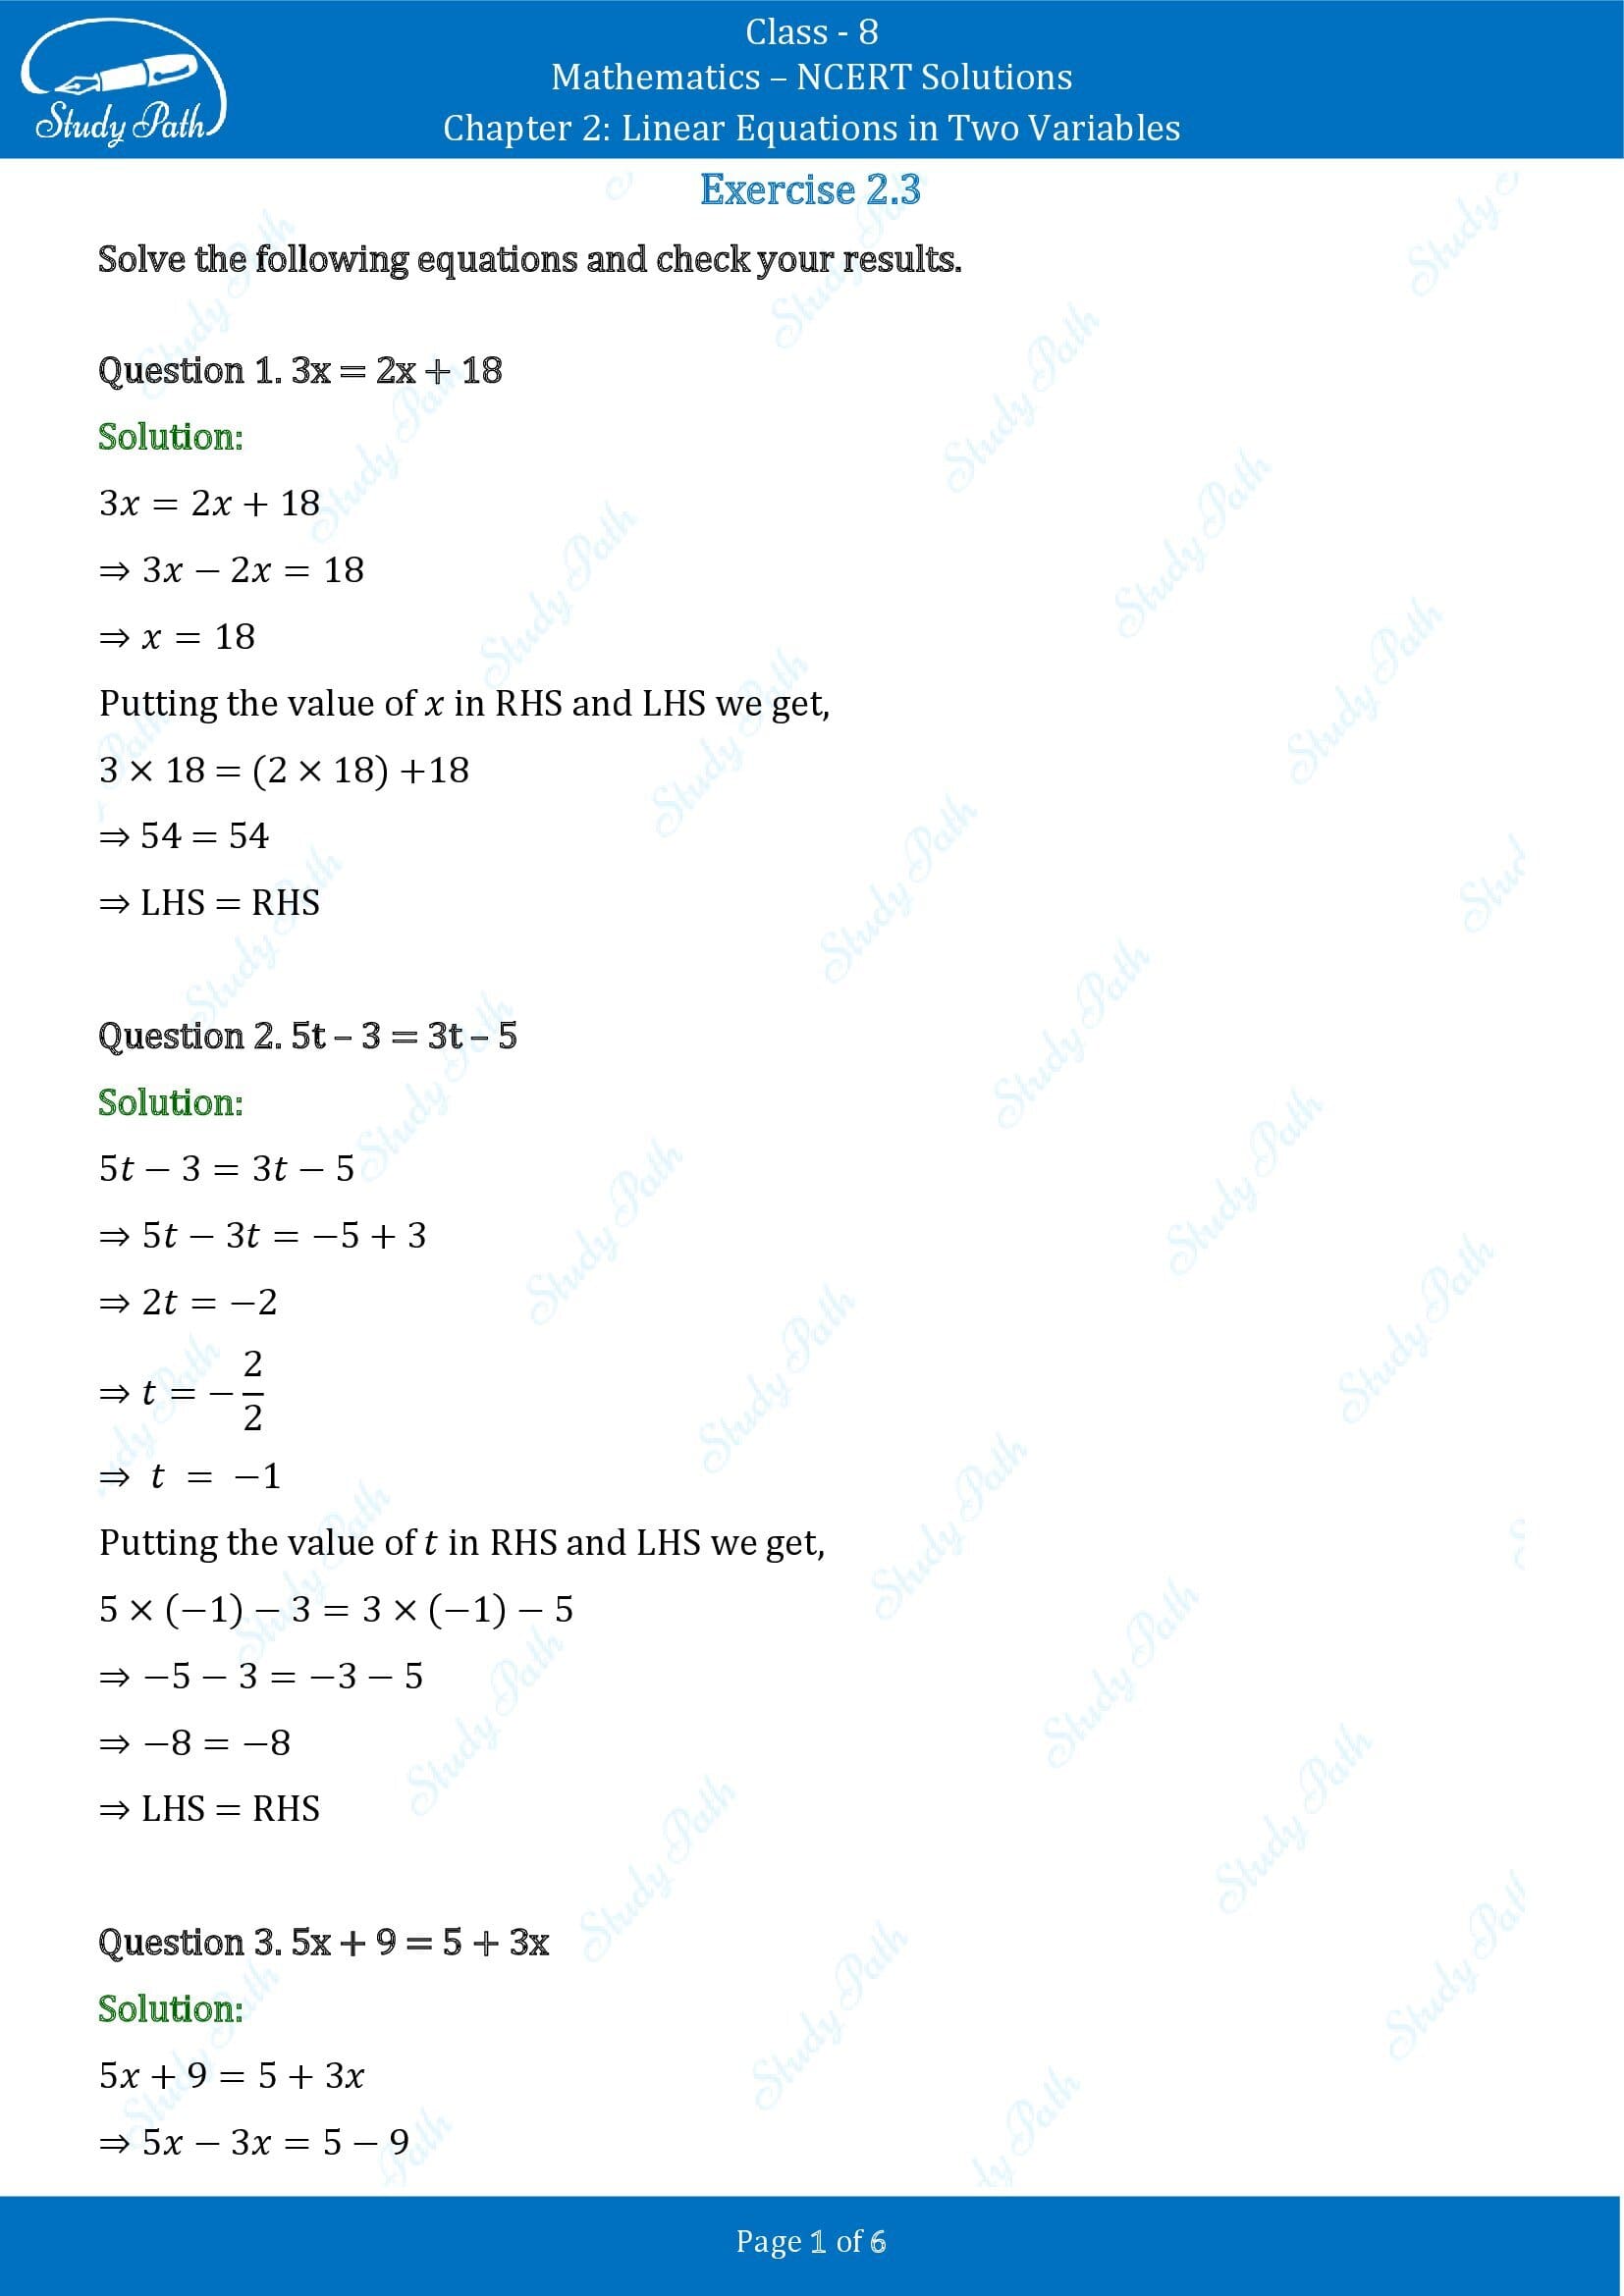 NCERT Solutions for Class 8 Maths Chapter 2 Linear Equations in Two Variables Exercise 2.3 00001